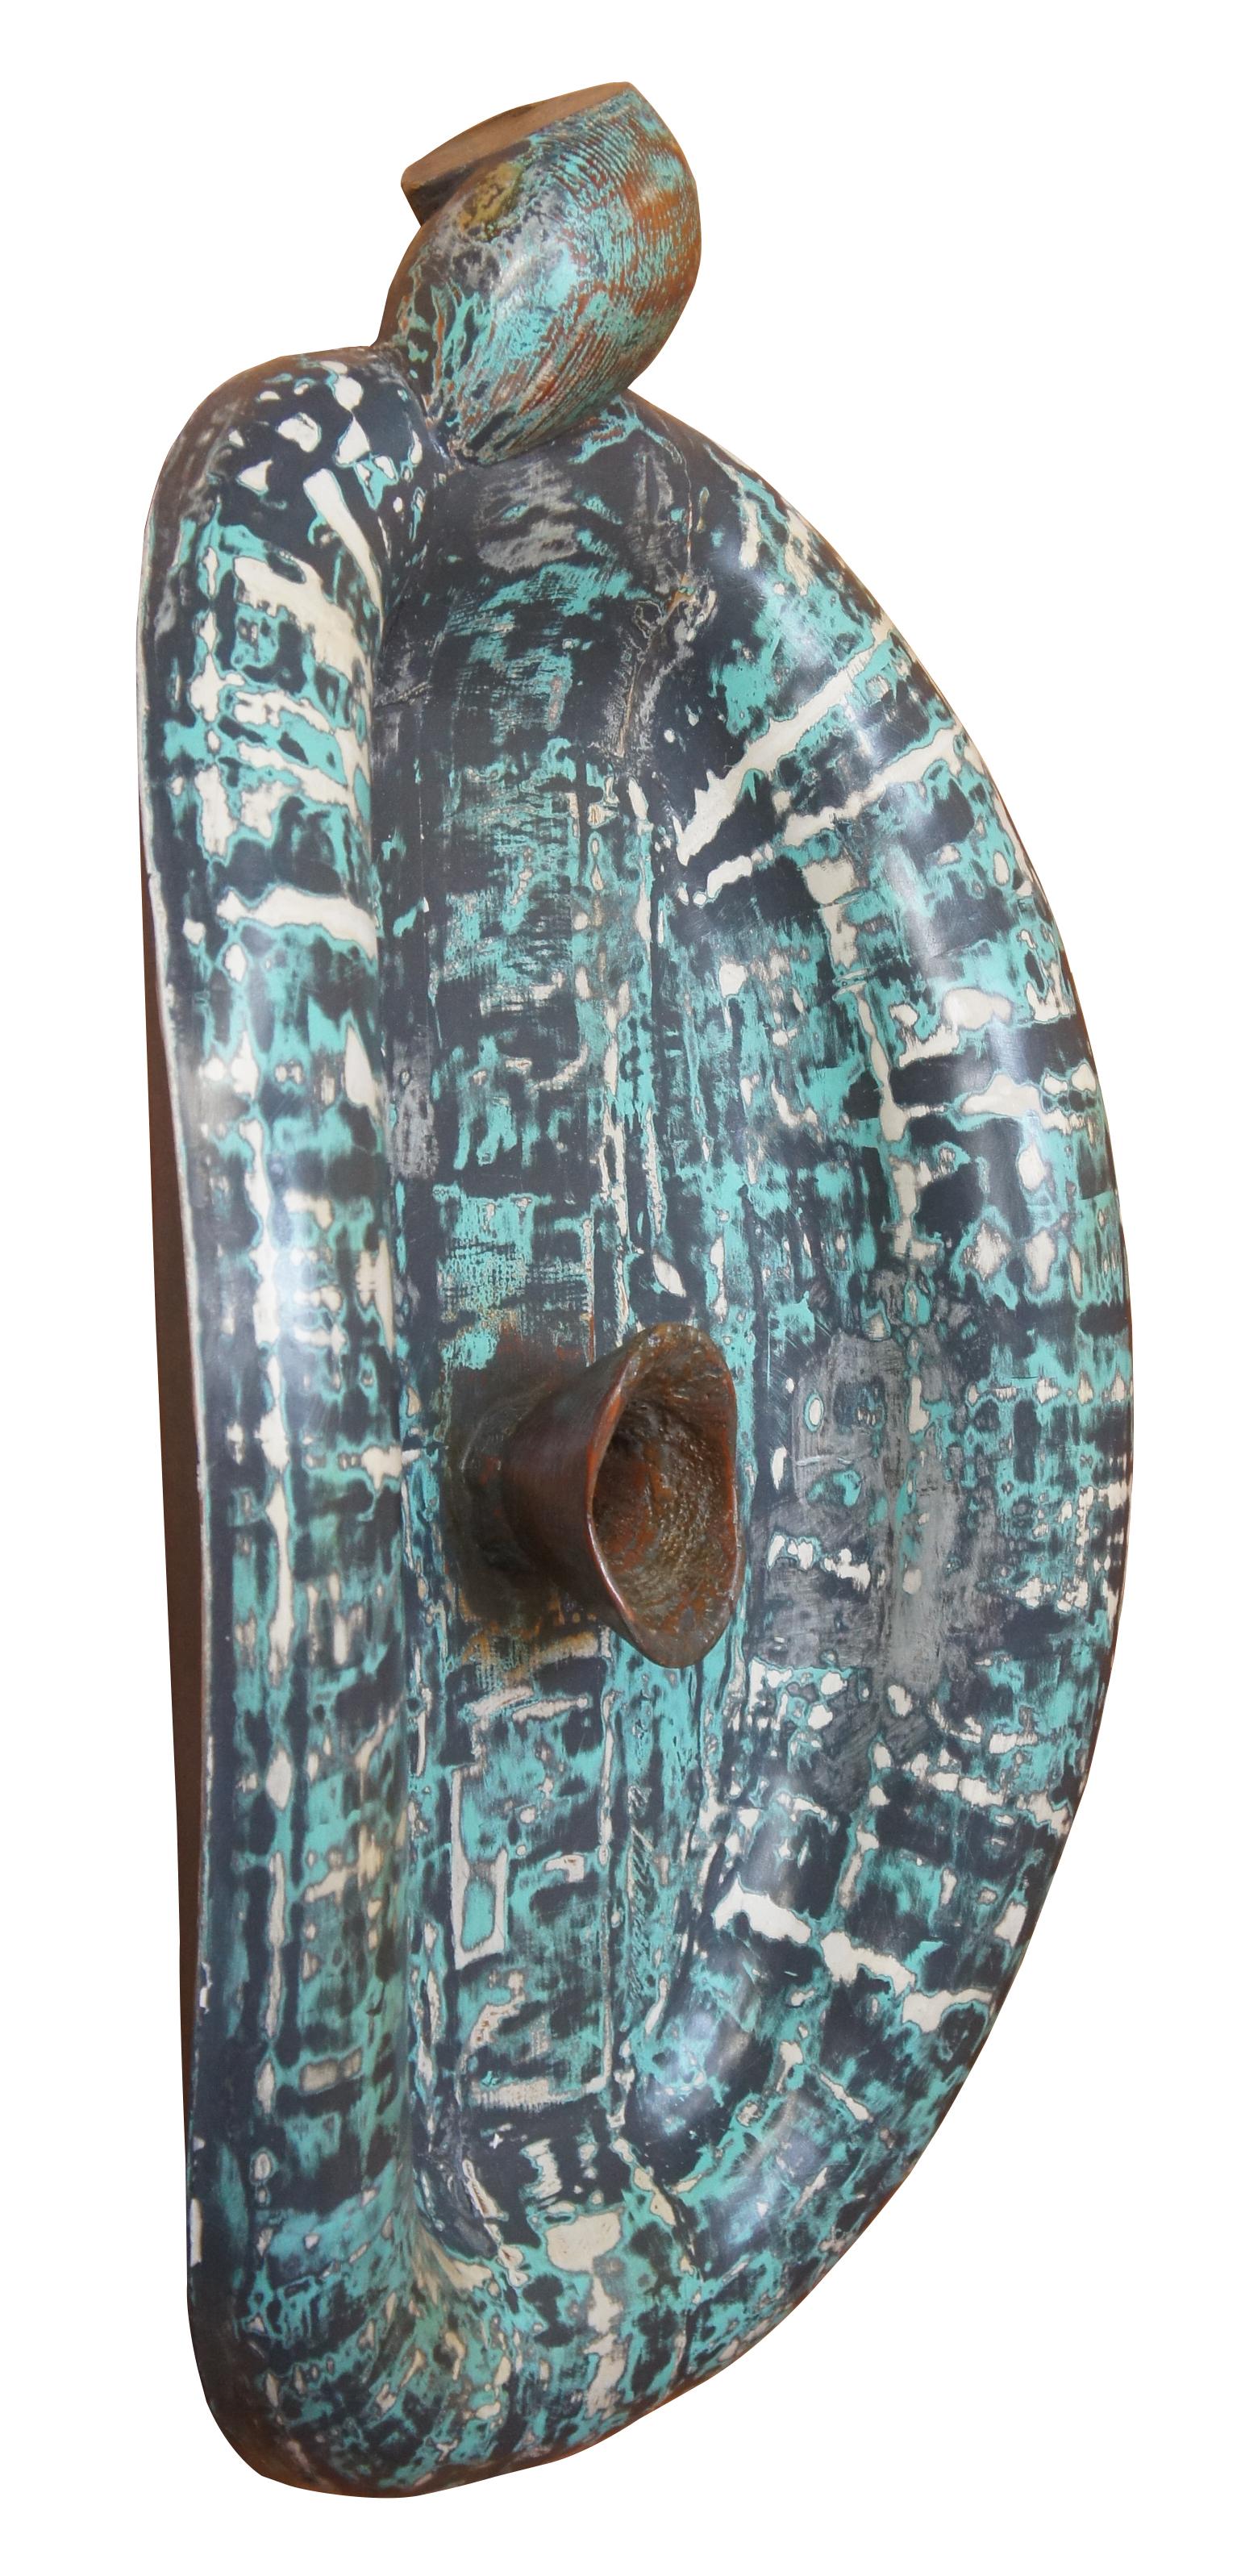 1991 Jack Carter hand carved and painted abstract modern wall art sculpture.

Wall medallion sculpture, features modern styling with tortoise shell shape and hand carved detail / painted finish.